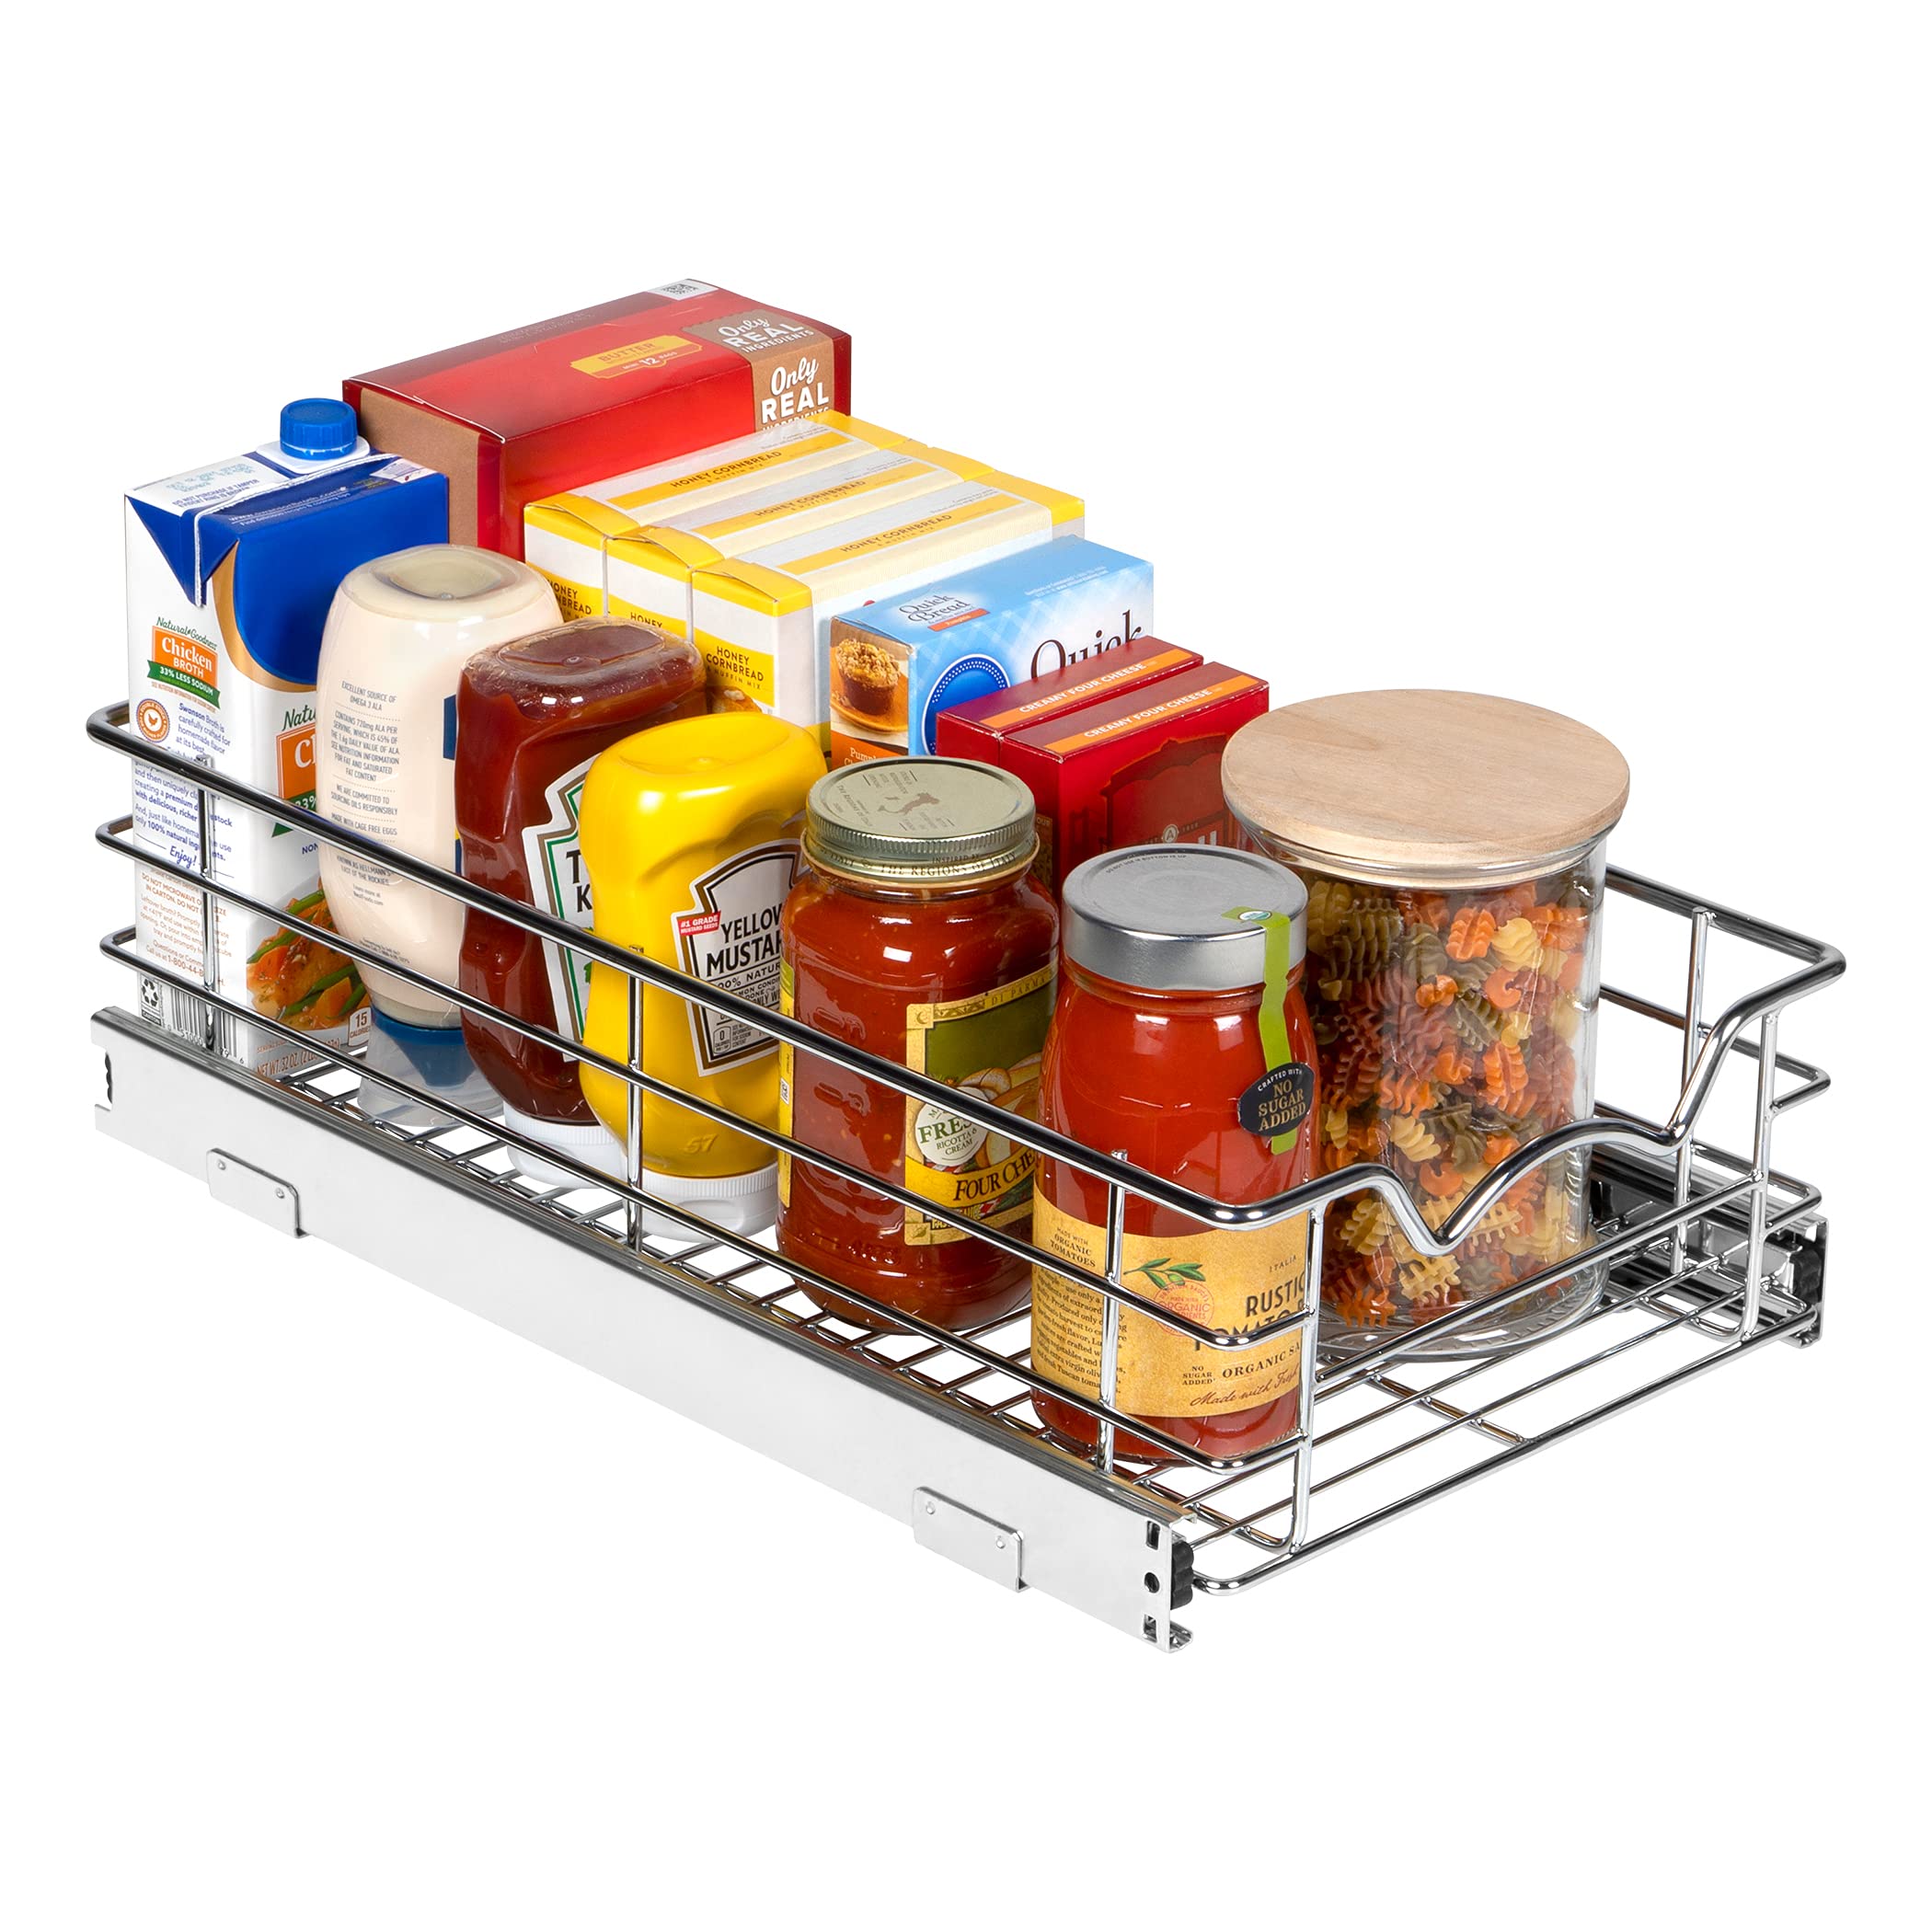 Cabinet Pull Out Shelves – 5” High Slide Out Cabinet Organizer Basket – Heavy Gauge Metal Wire - Pull Out Drawer for Kitchen Cabinets.